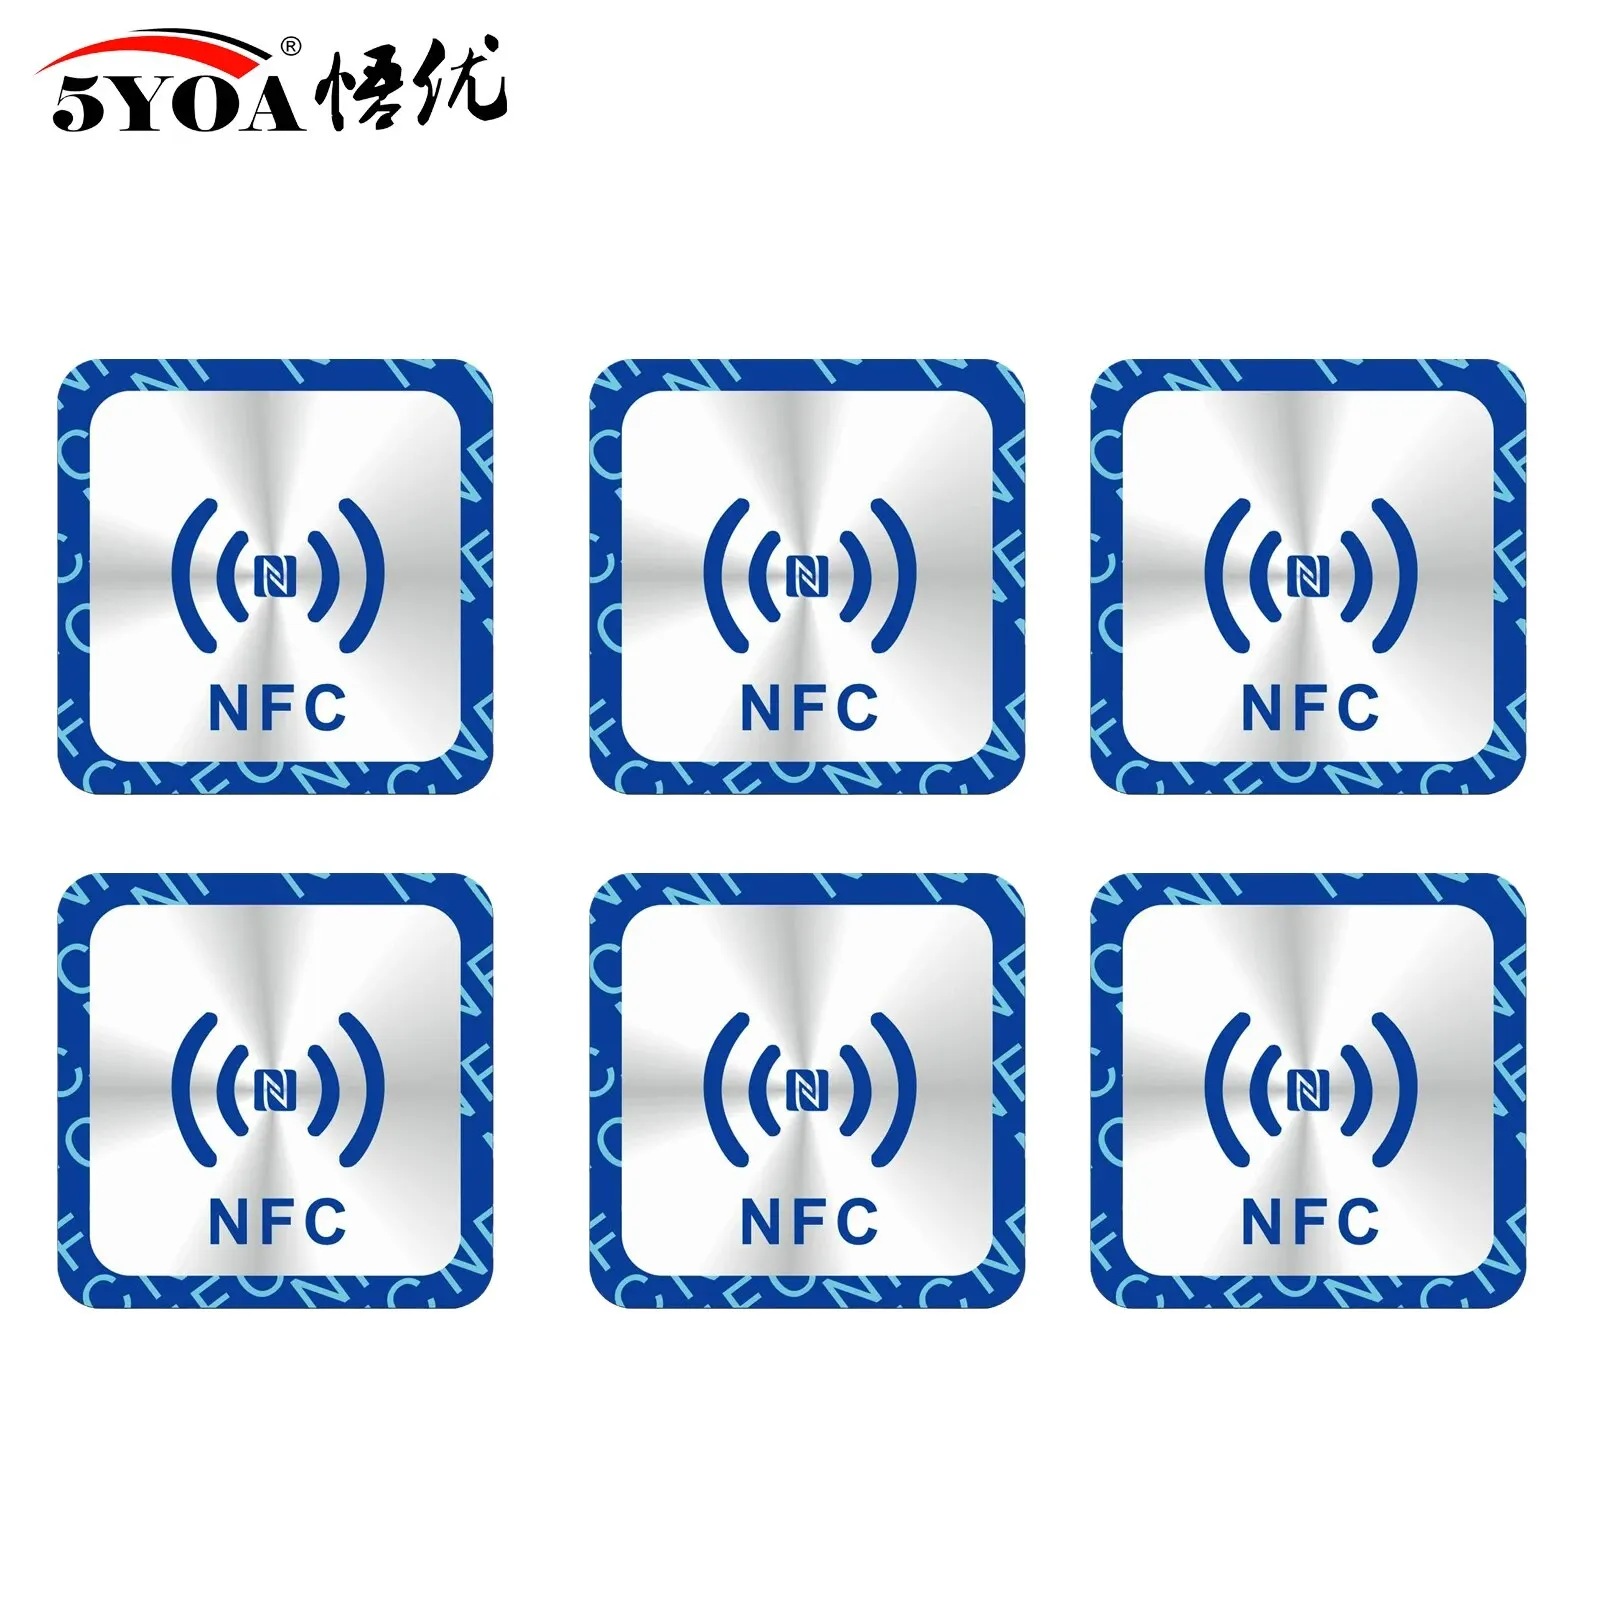 5YOA 30pcs NFC Tag Nfc213 Label 213 Stickers Tags Badges Lable Sticker 13.56mhz For Huawei Share Ios13 Personal Automation Short images - 6